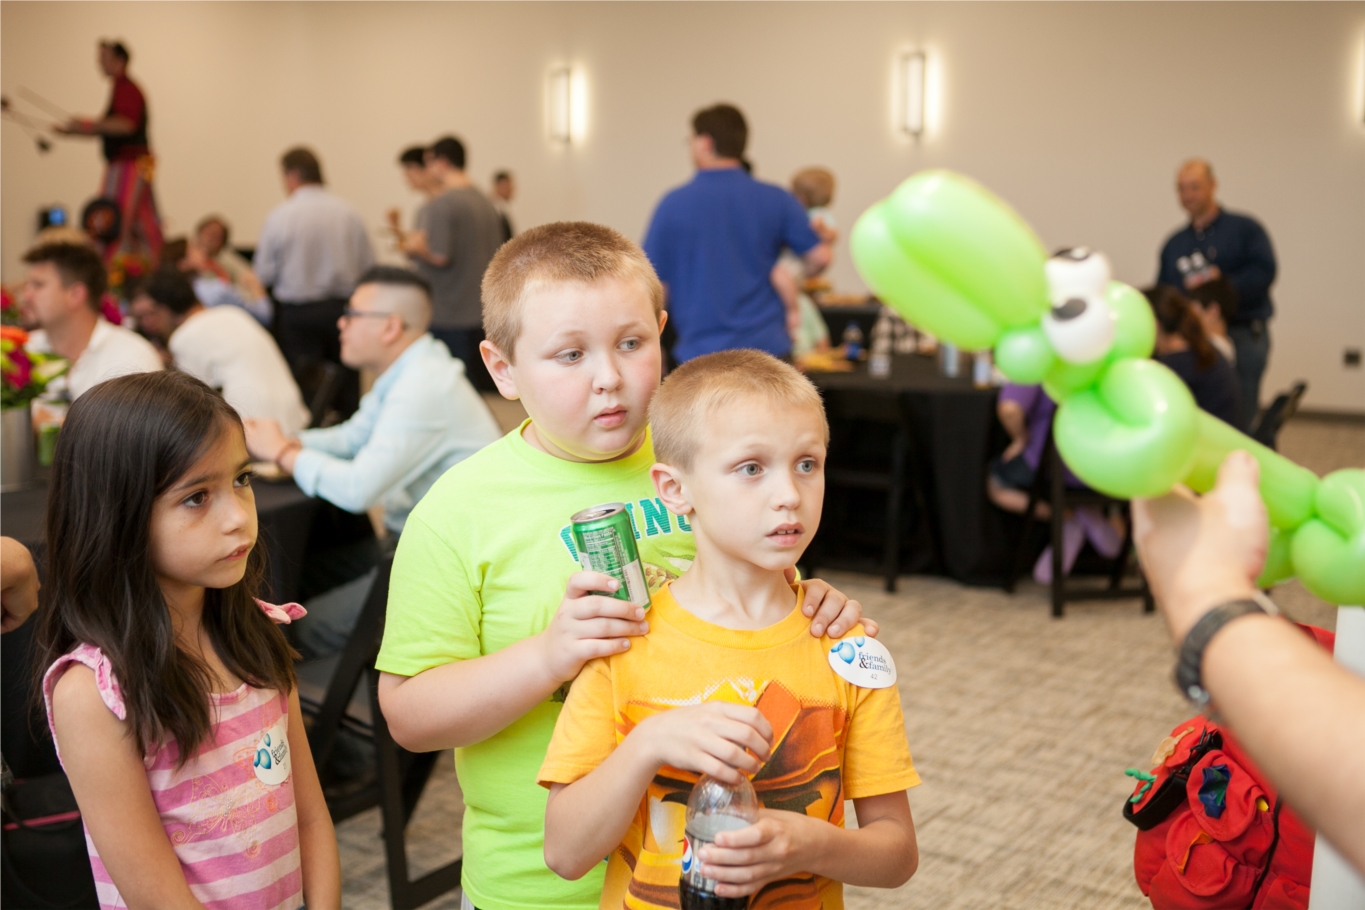 Employees' children enjoy ballon making at our annual family event.